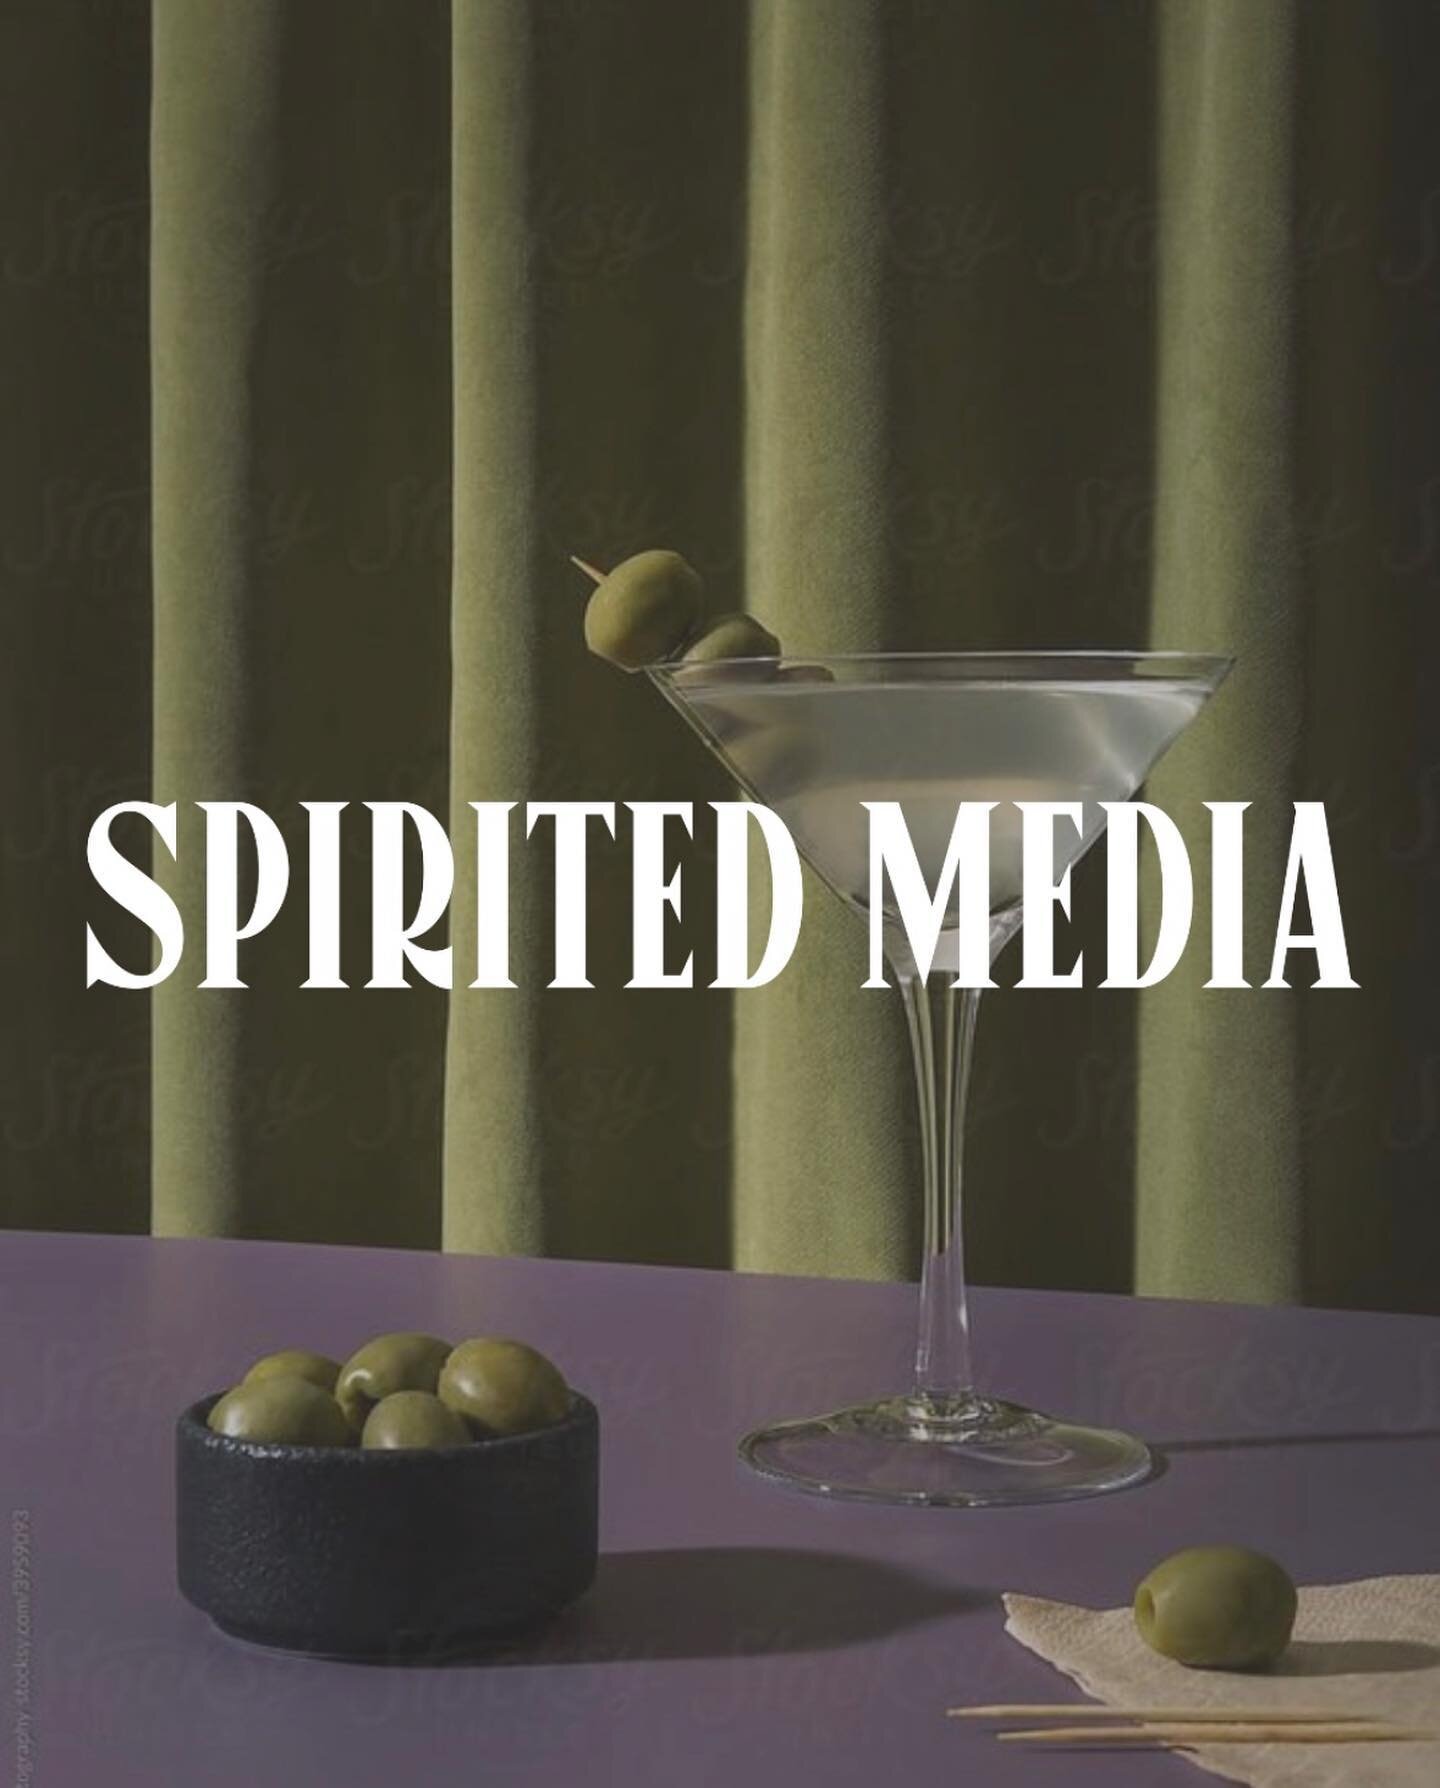 &ldquo;Like a well-crafted martini, a winning social media plan requires the right blend of ingredients. With Spirited Media by your side, we'll mix together compelling storytelling, engaging copy, and targeted audience insights to serve up a social 